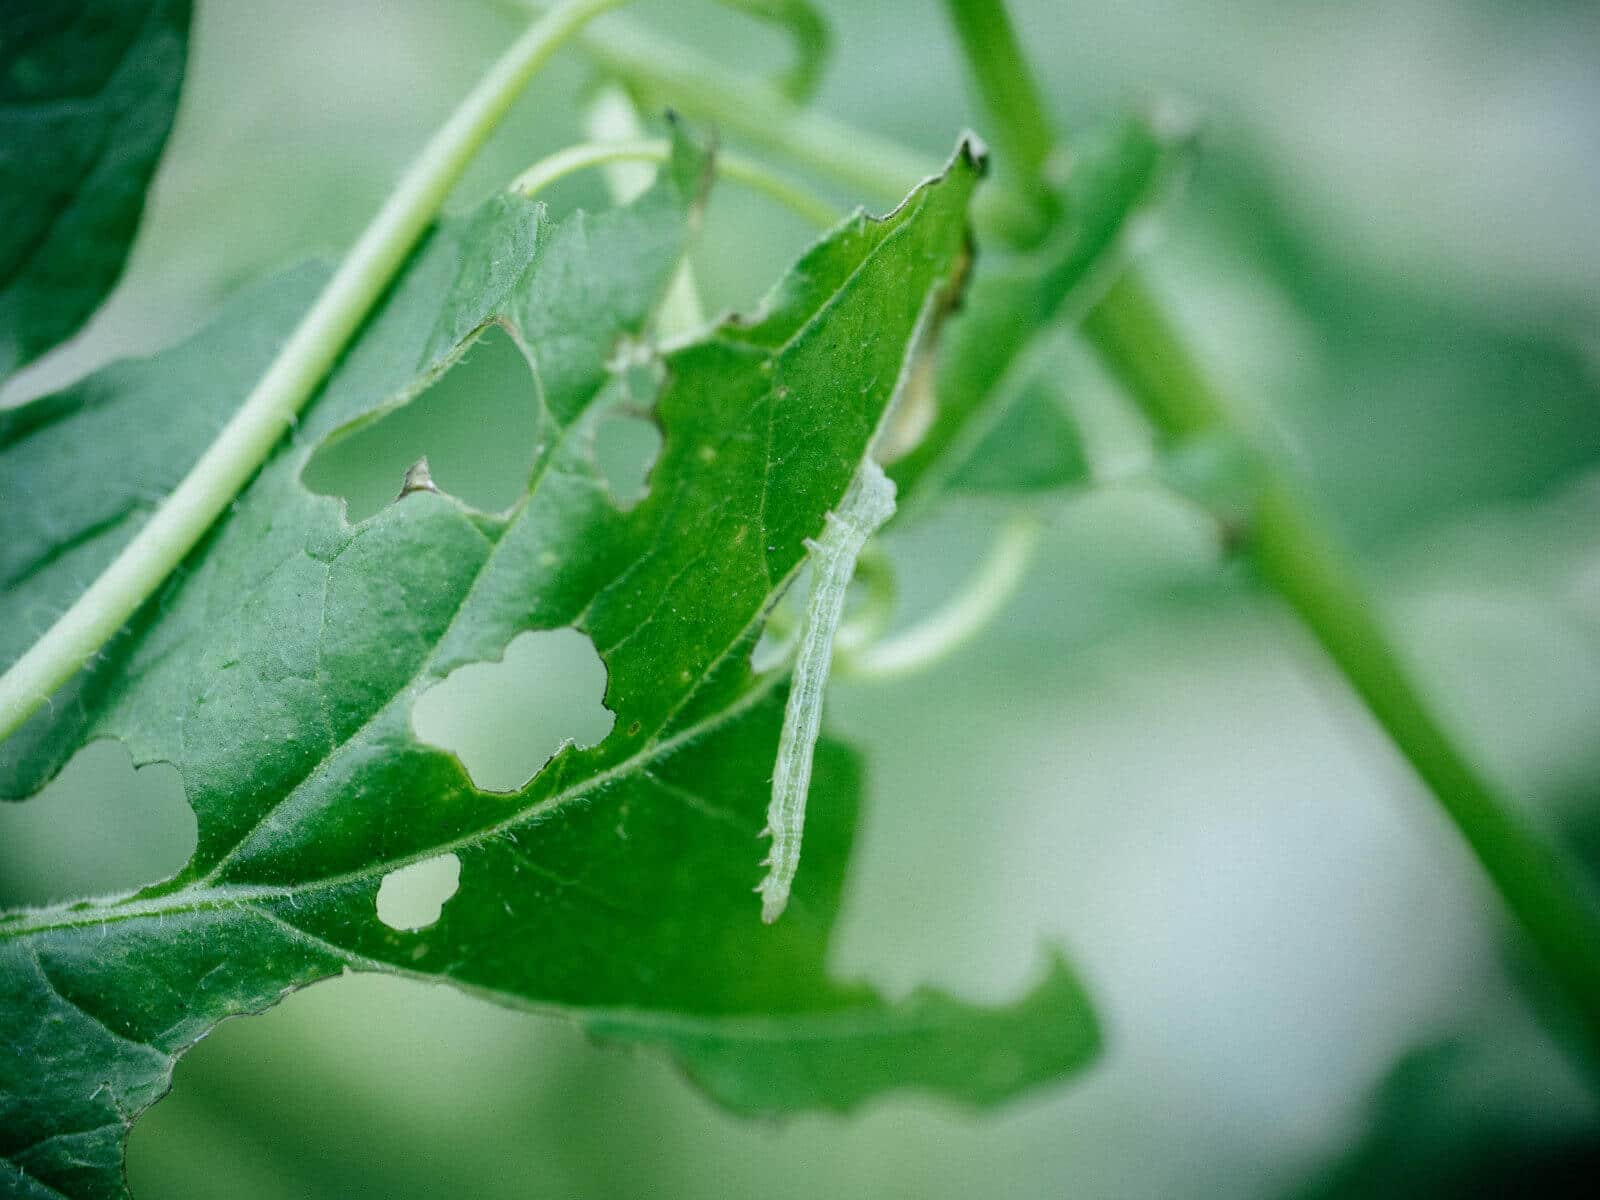 Pests can affect how long it takes for a plant to mature